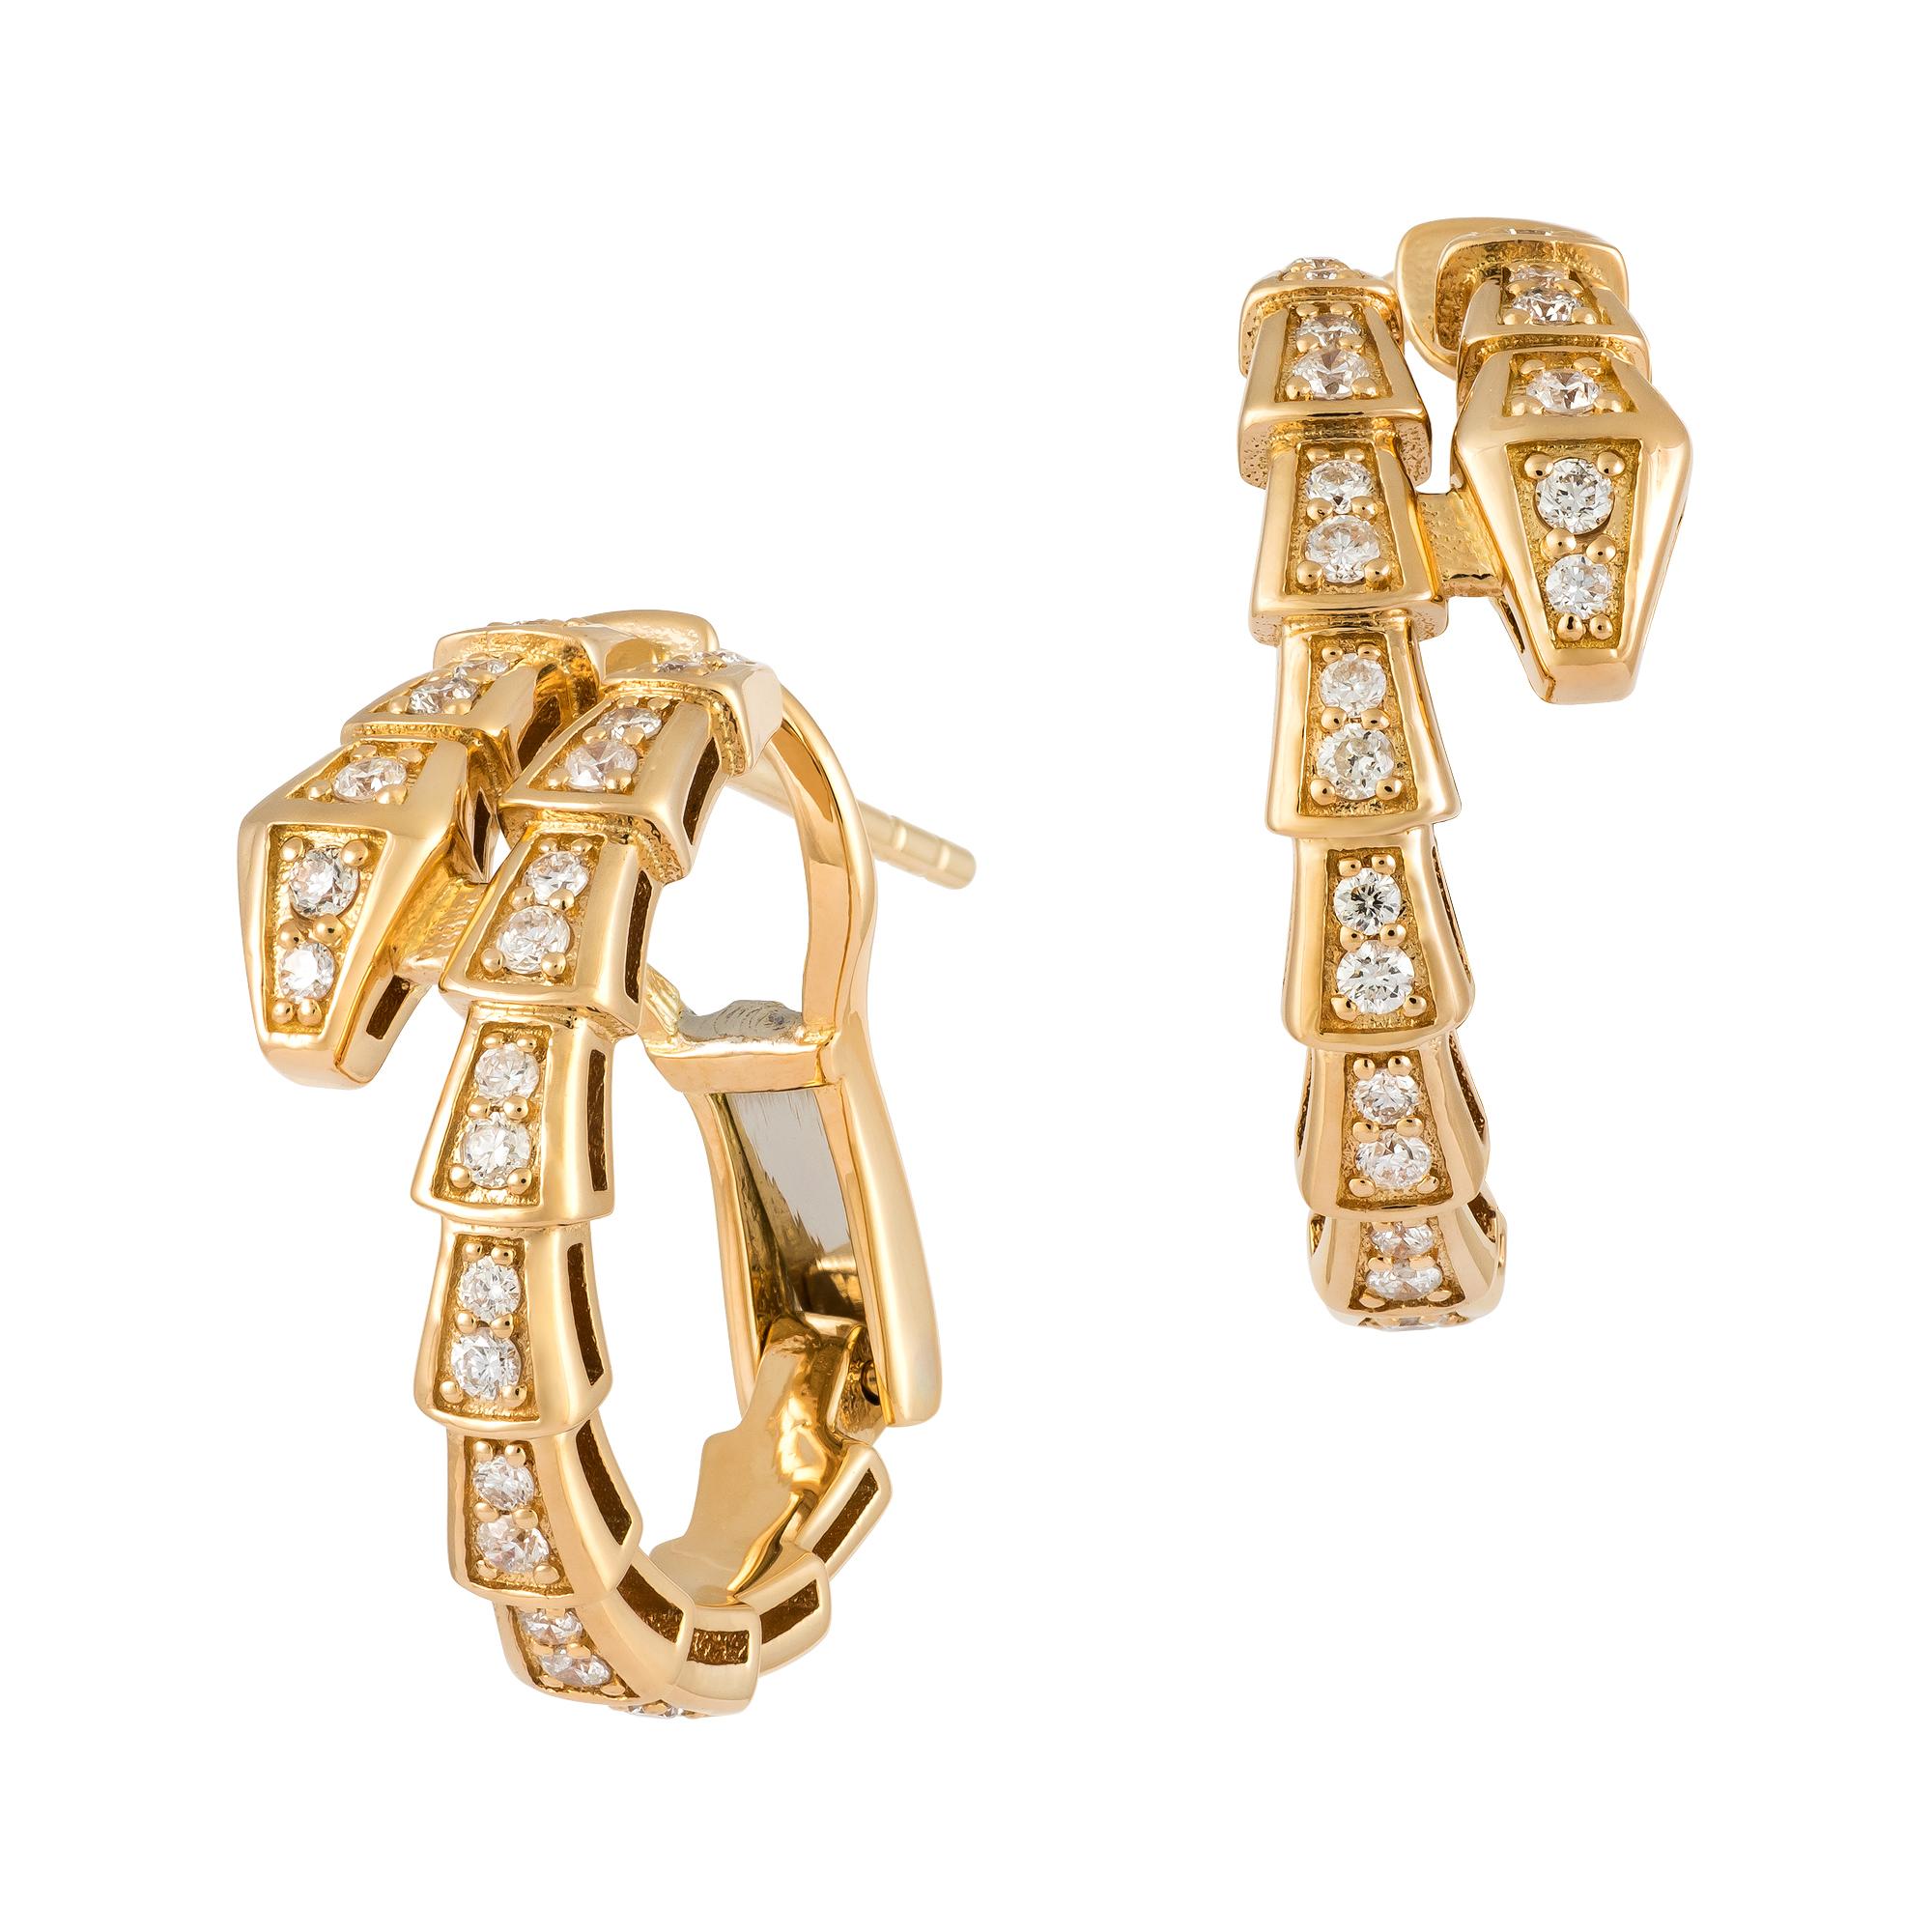 Modern Every Day Hoop Yellow Gold 18K Earrings Diamond For Her For Sale